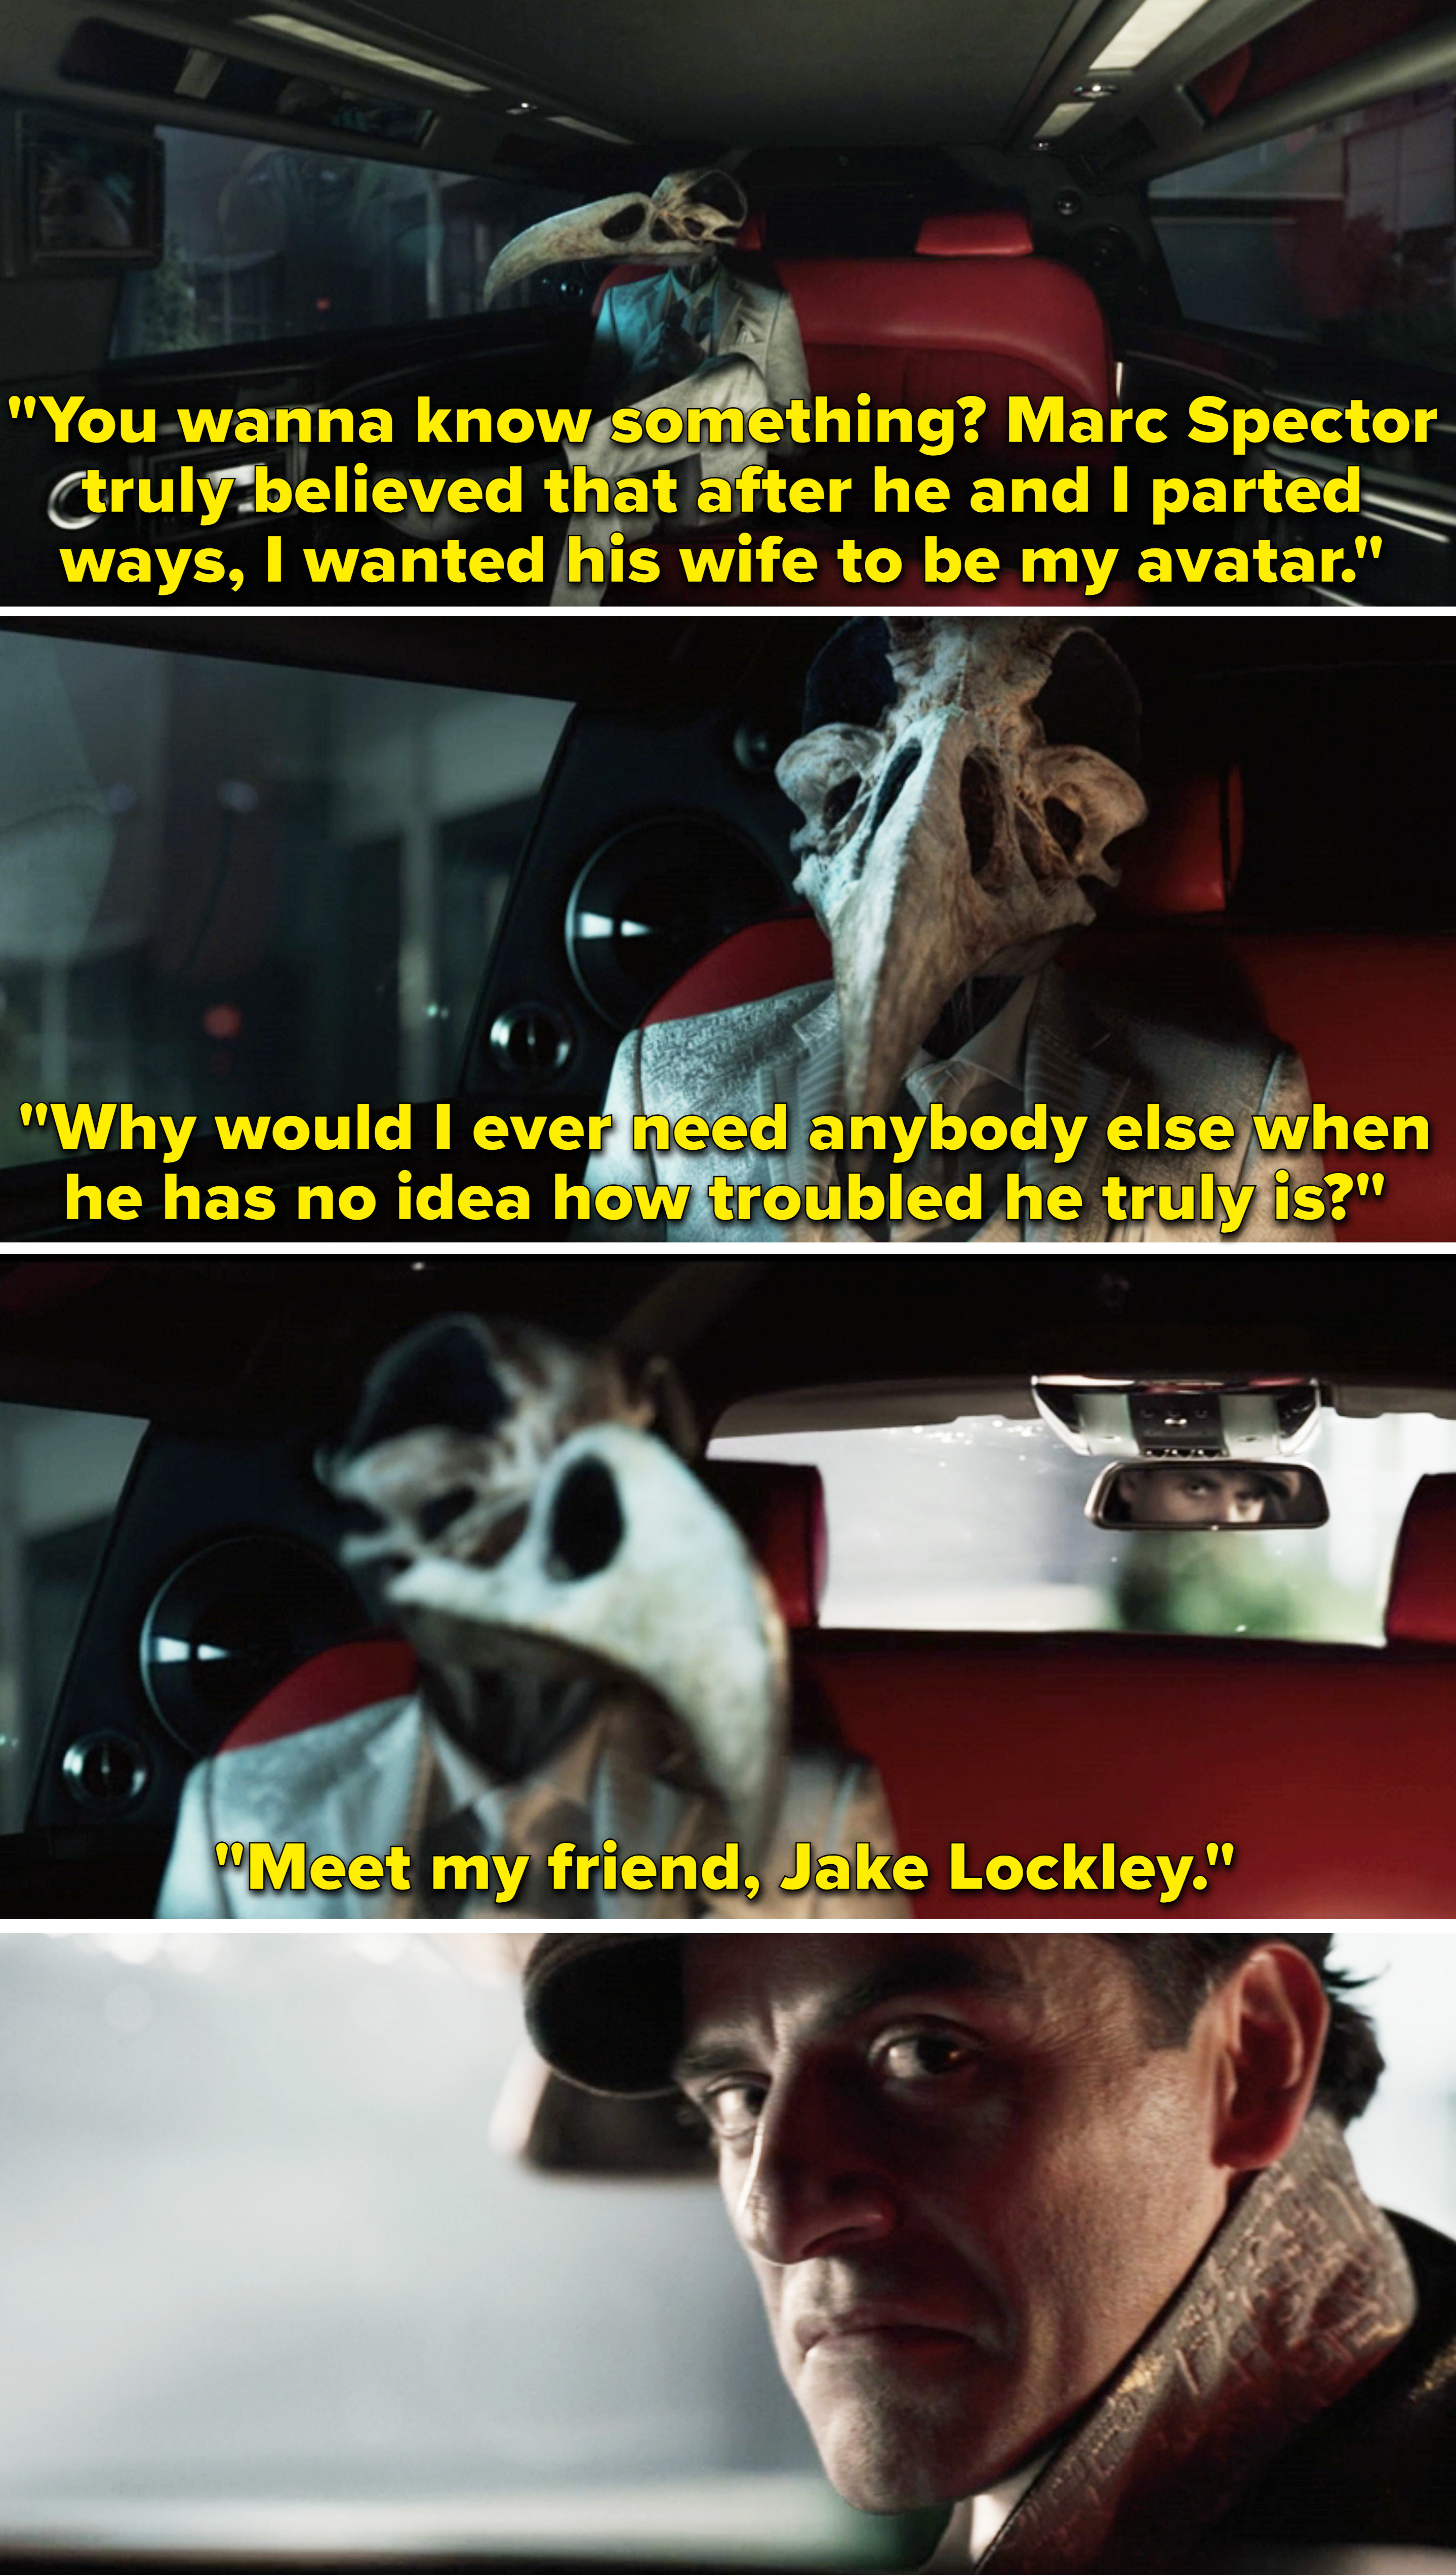 Khonshu saying &quot;Meet my friend, Jake Lockley&quot; and revealing a third character played by Oscar Isaac